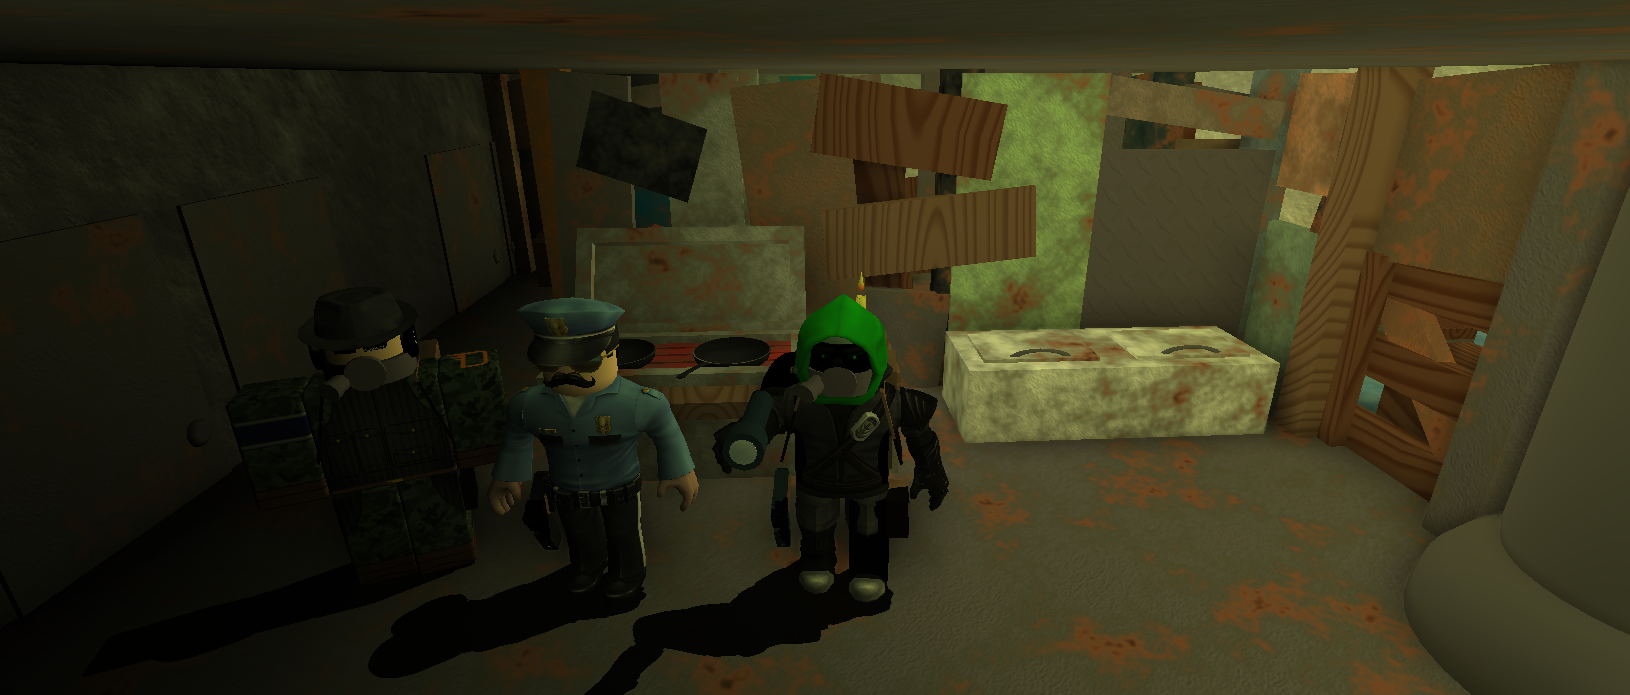 Weekly Roblox Roundup July 7th 2013 Roblox Blog - page six roblox